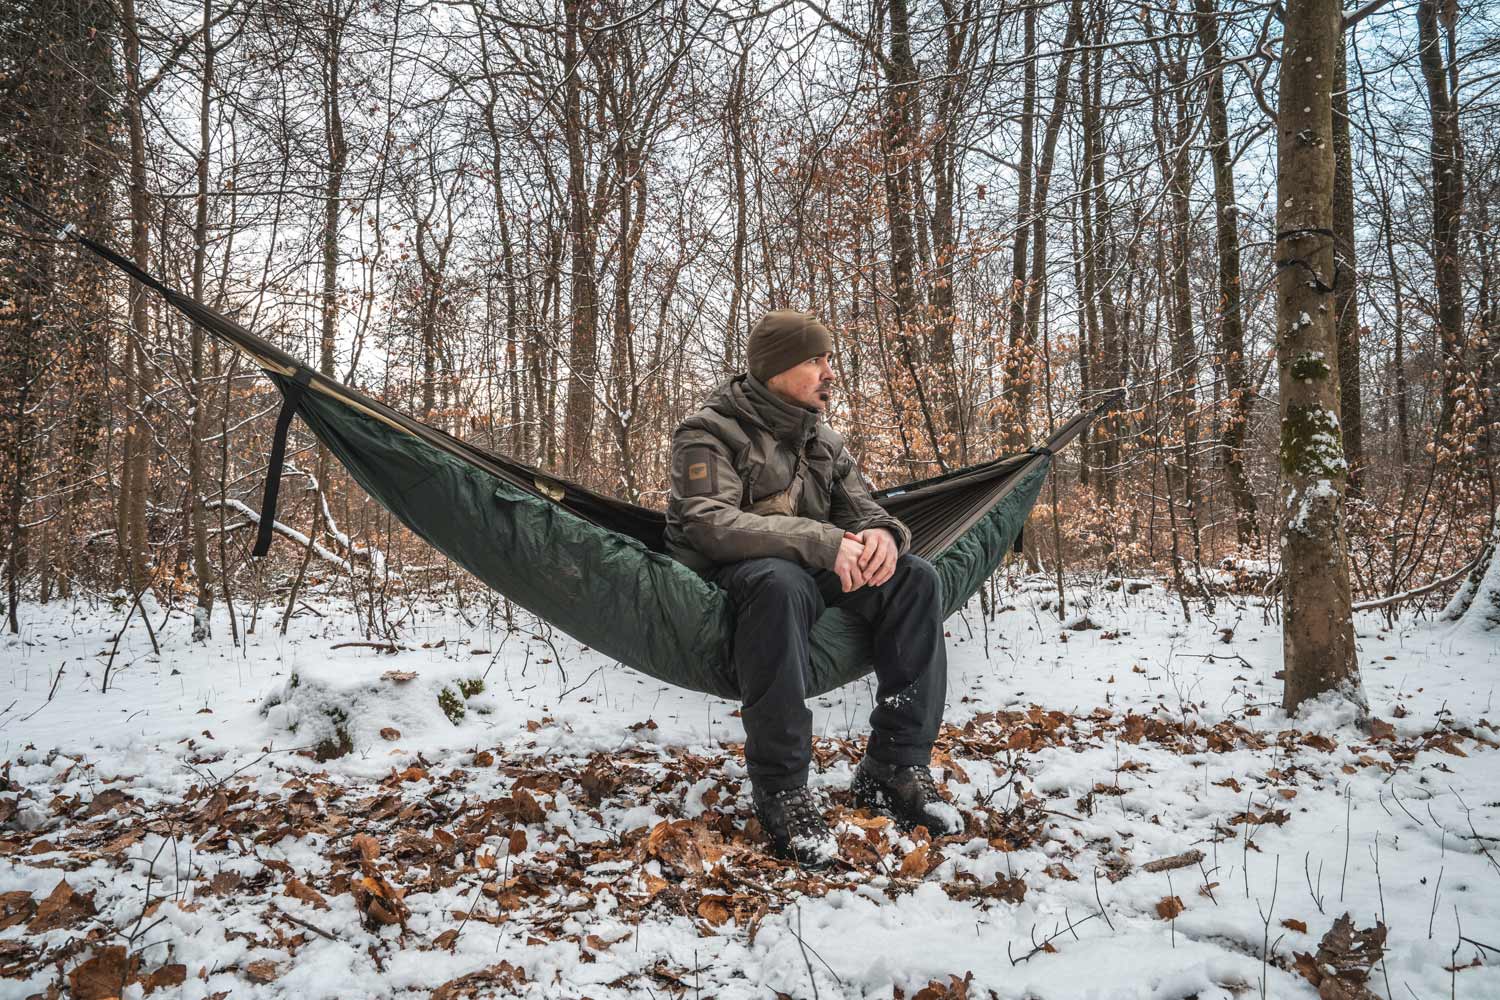 Goose Down Underquilt – Advantages of down over hollow fiber filling for cold protection in your hammock